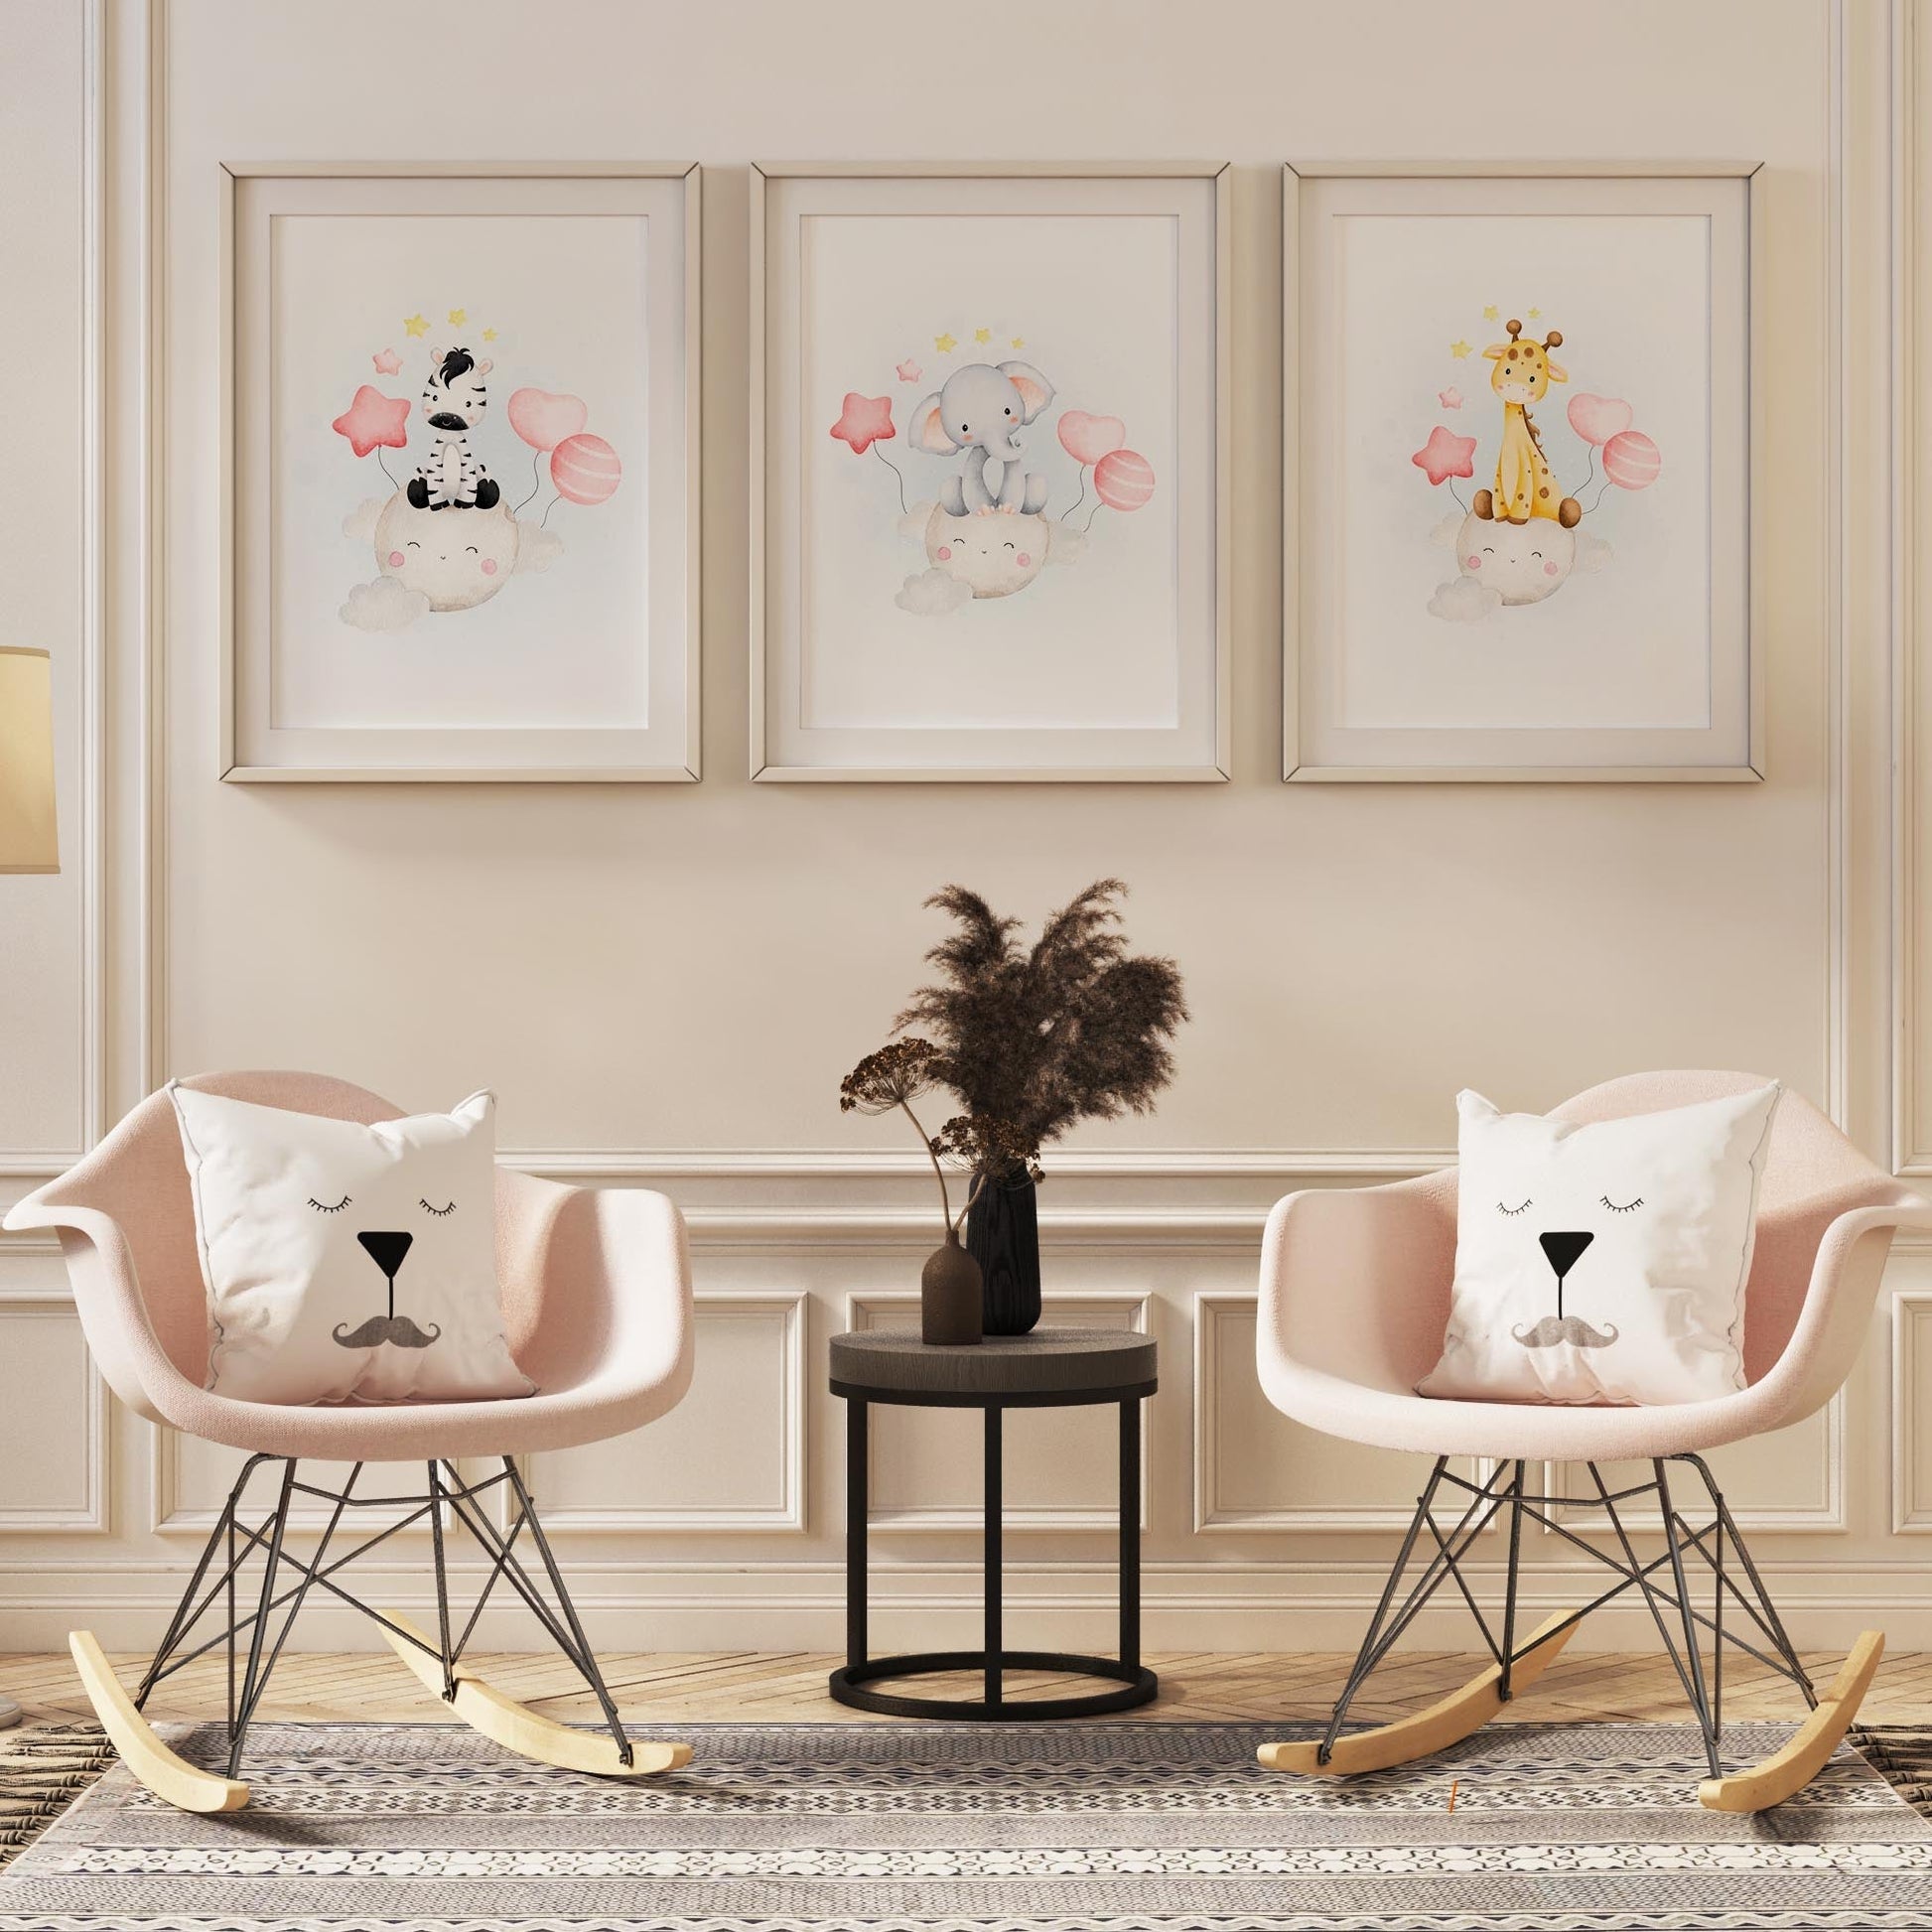 Three personalized animal-themed baby shower prints in framed canvas.